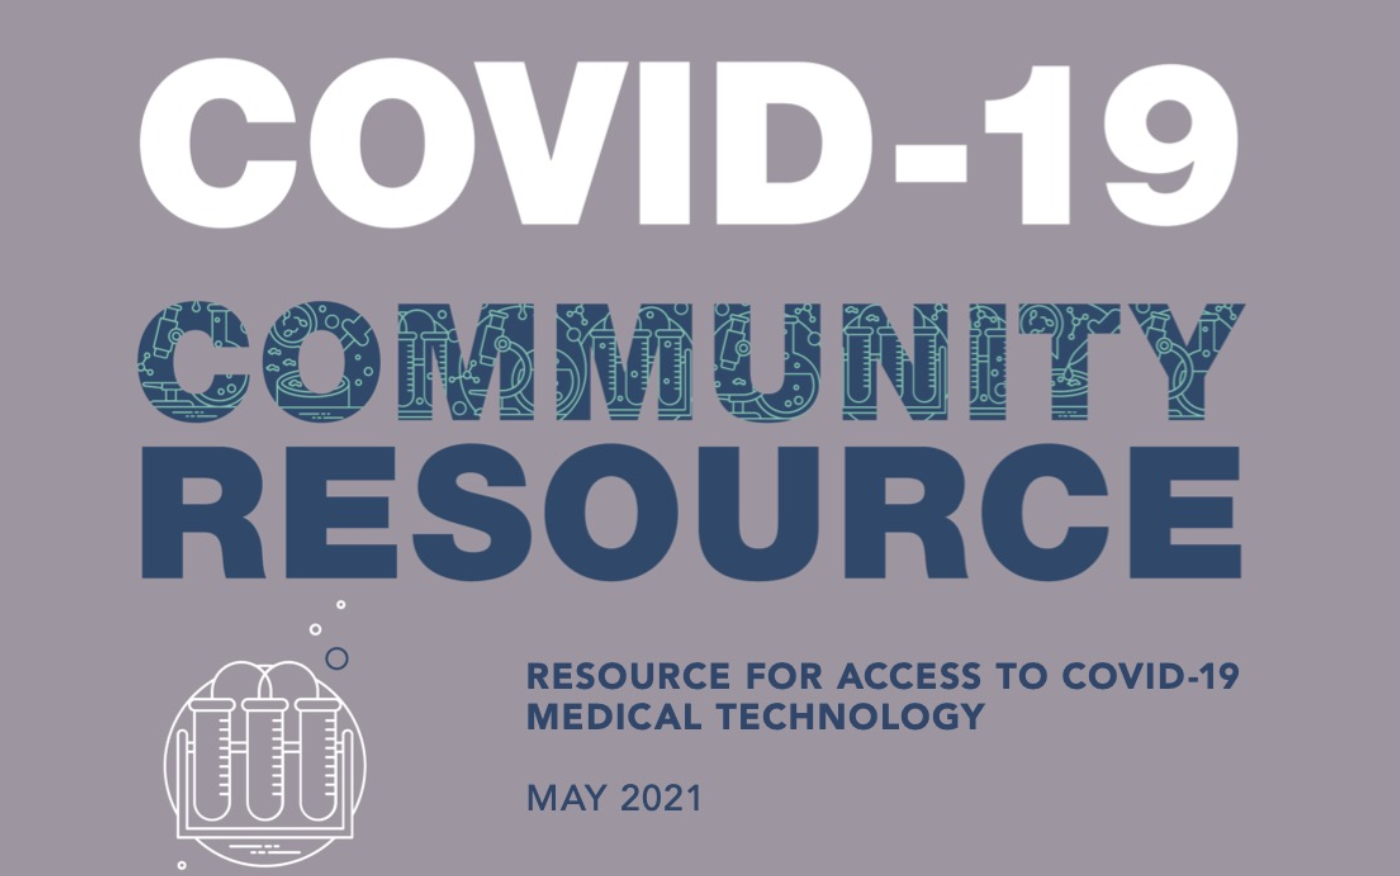 Community Resource for Access to COVID-19 Medical Technology